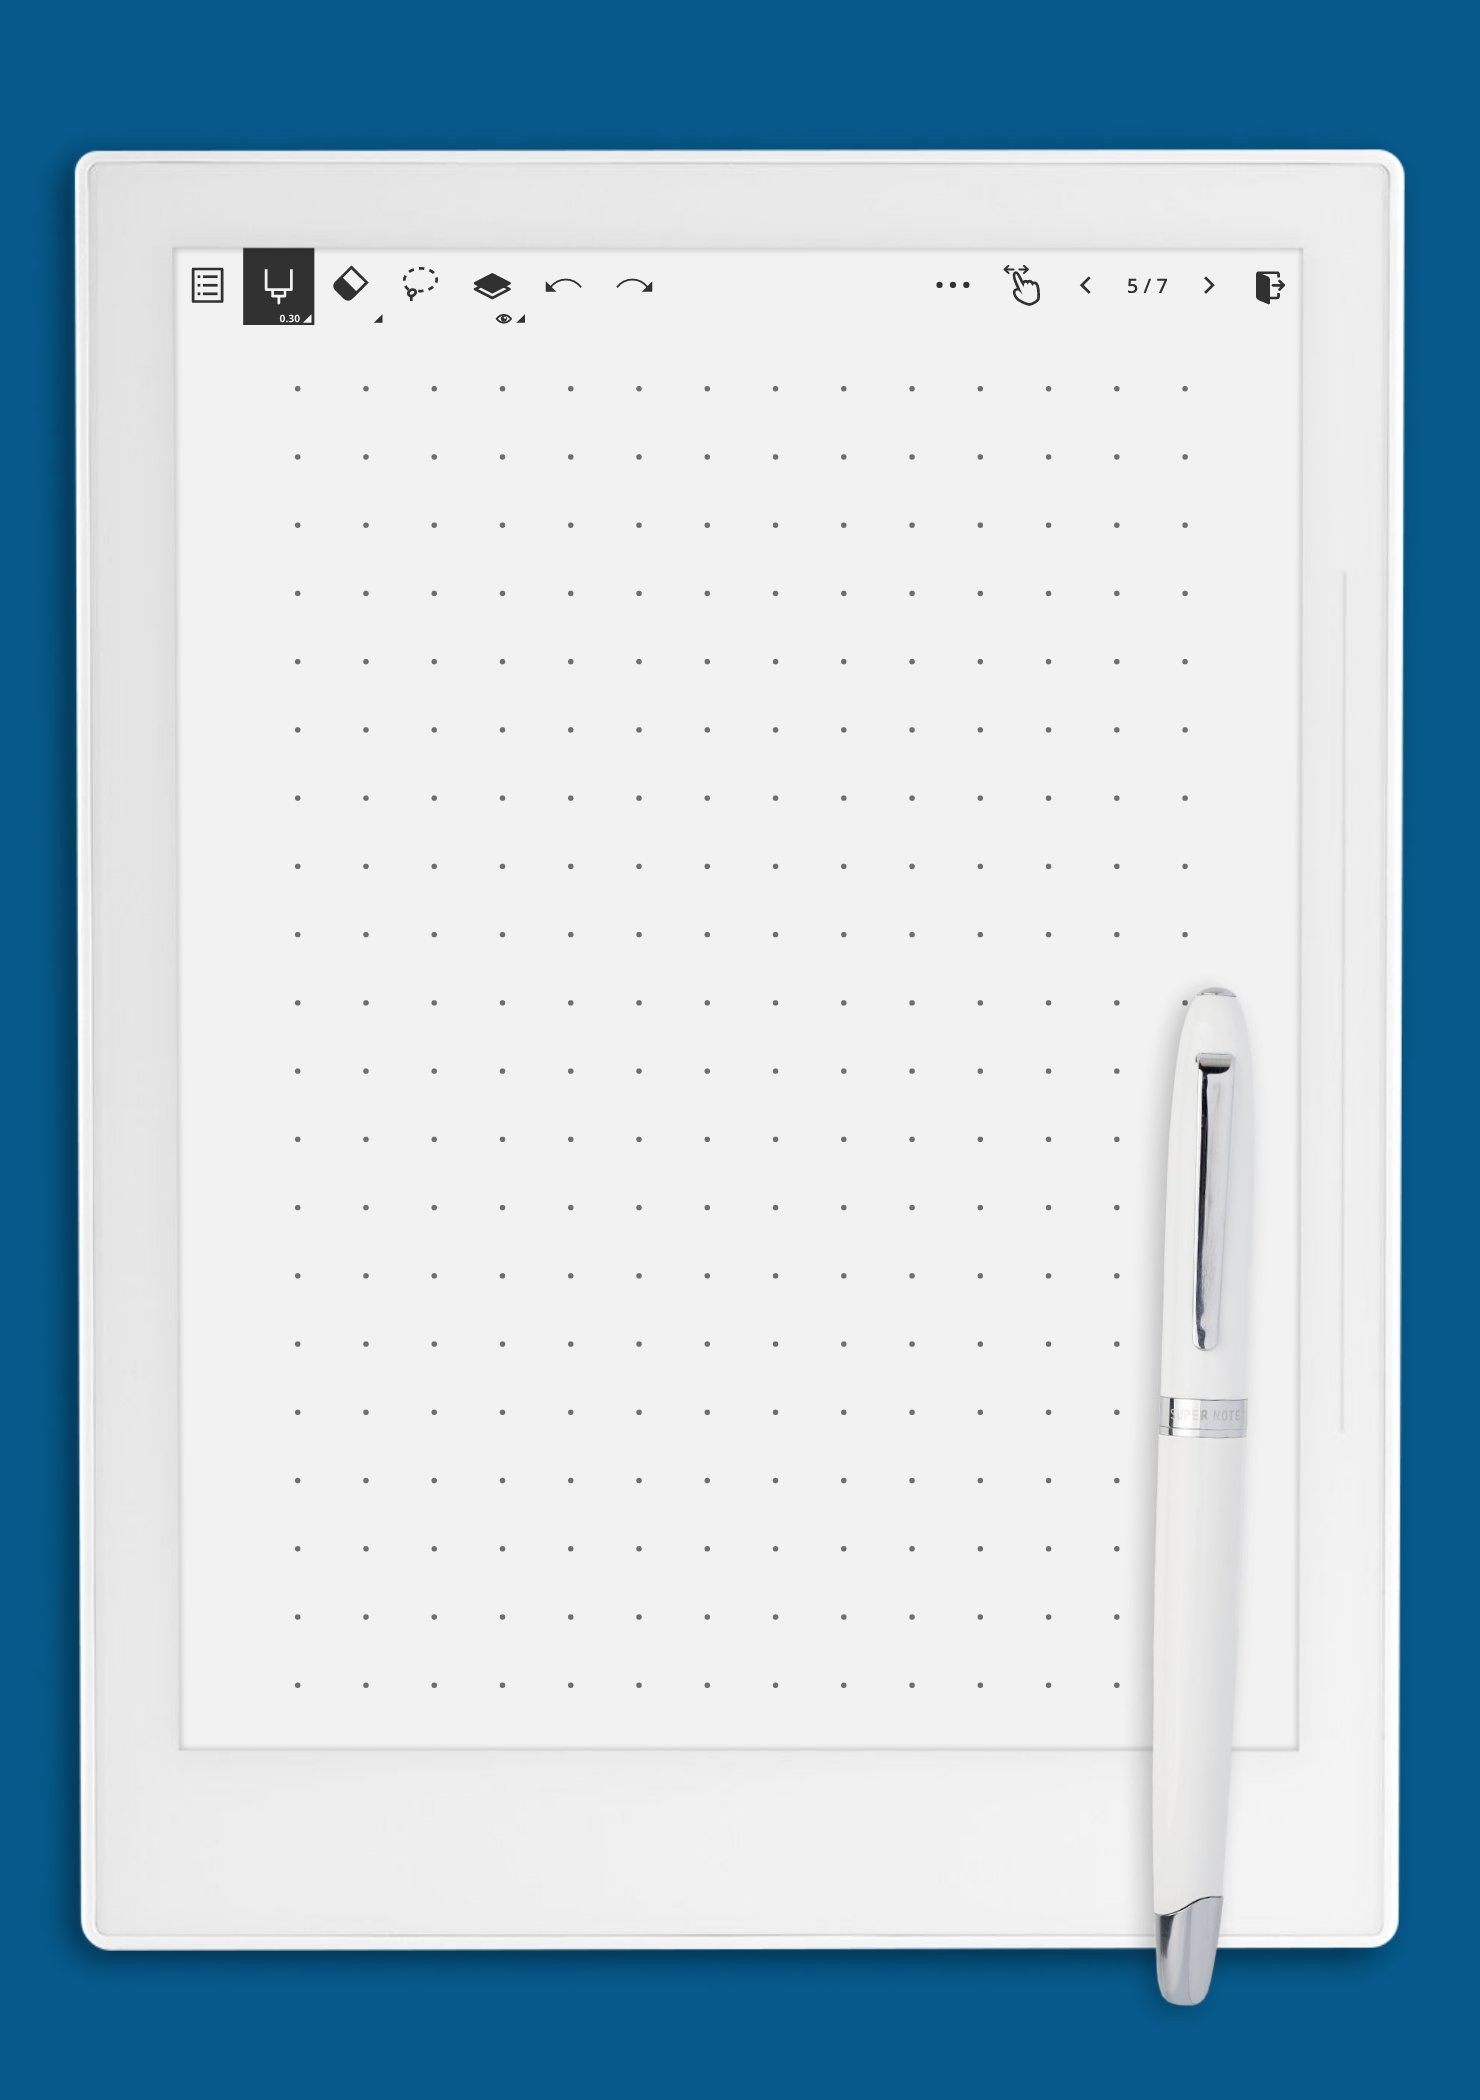 Free Printable 9 Dots Per Inch Black Dot Paper with Margin · InkPx